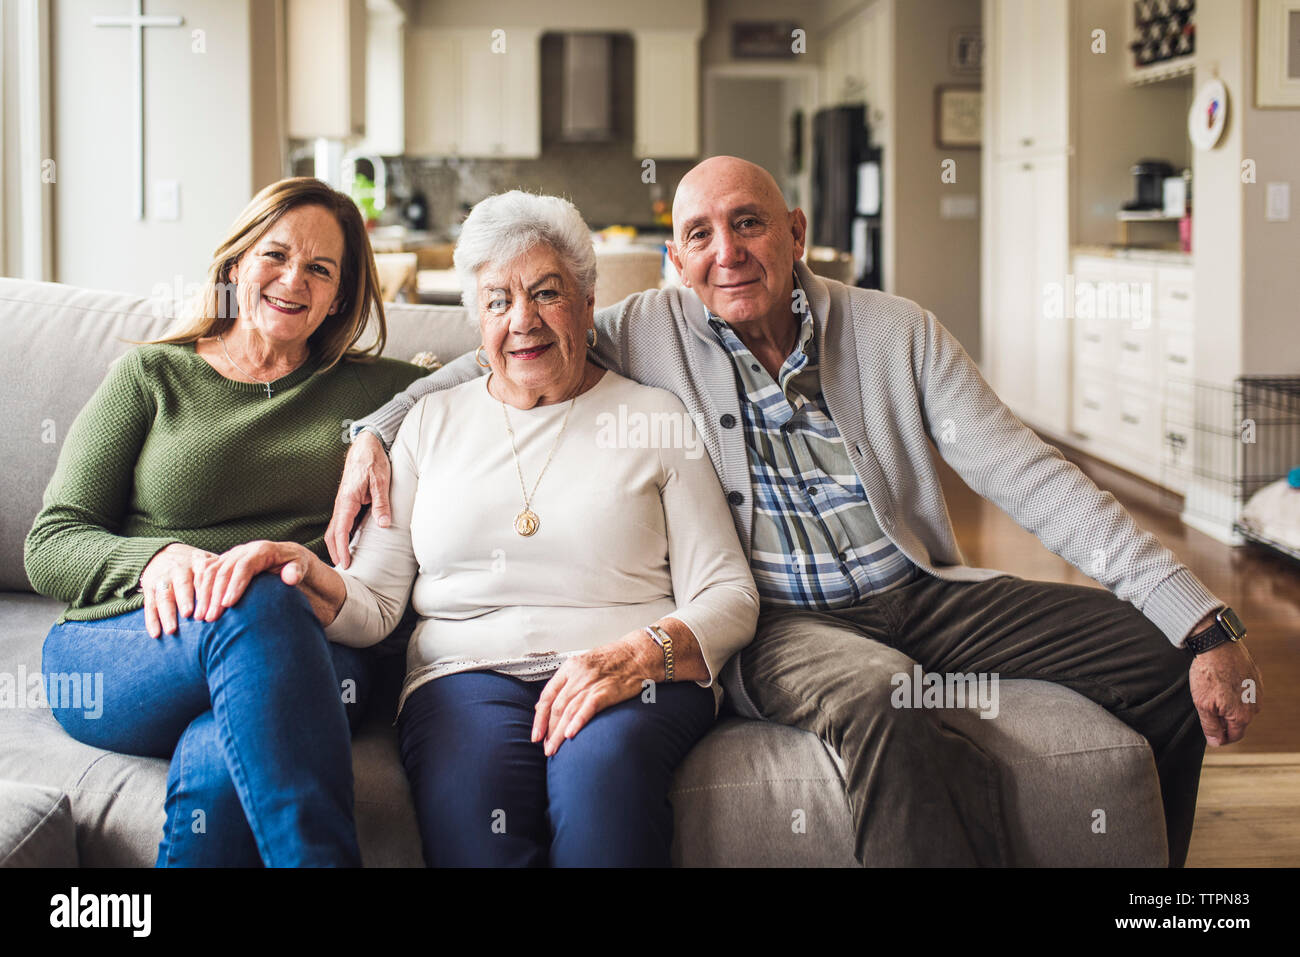 Portrait of multigenerational family sitting on living room couch Stock Photo